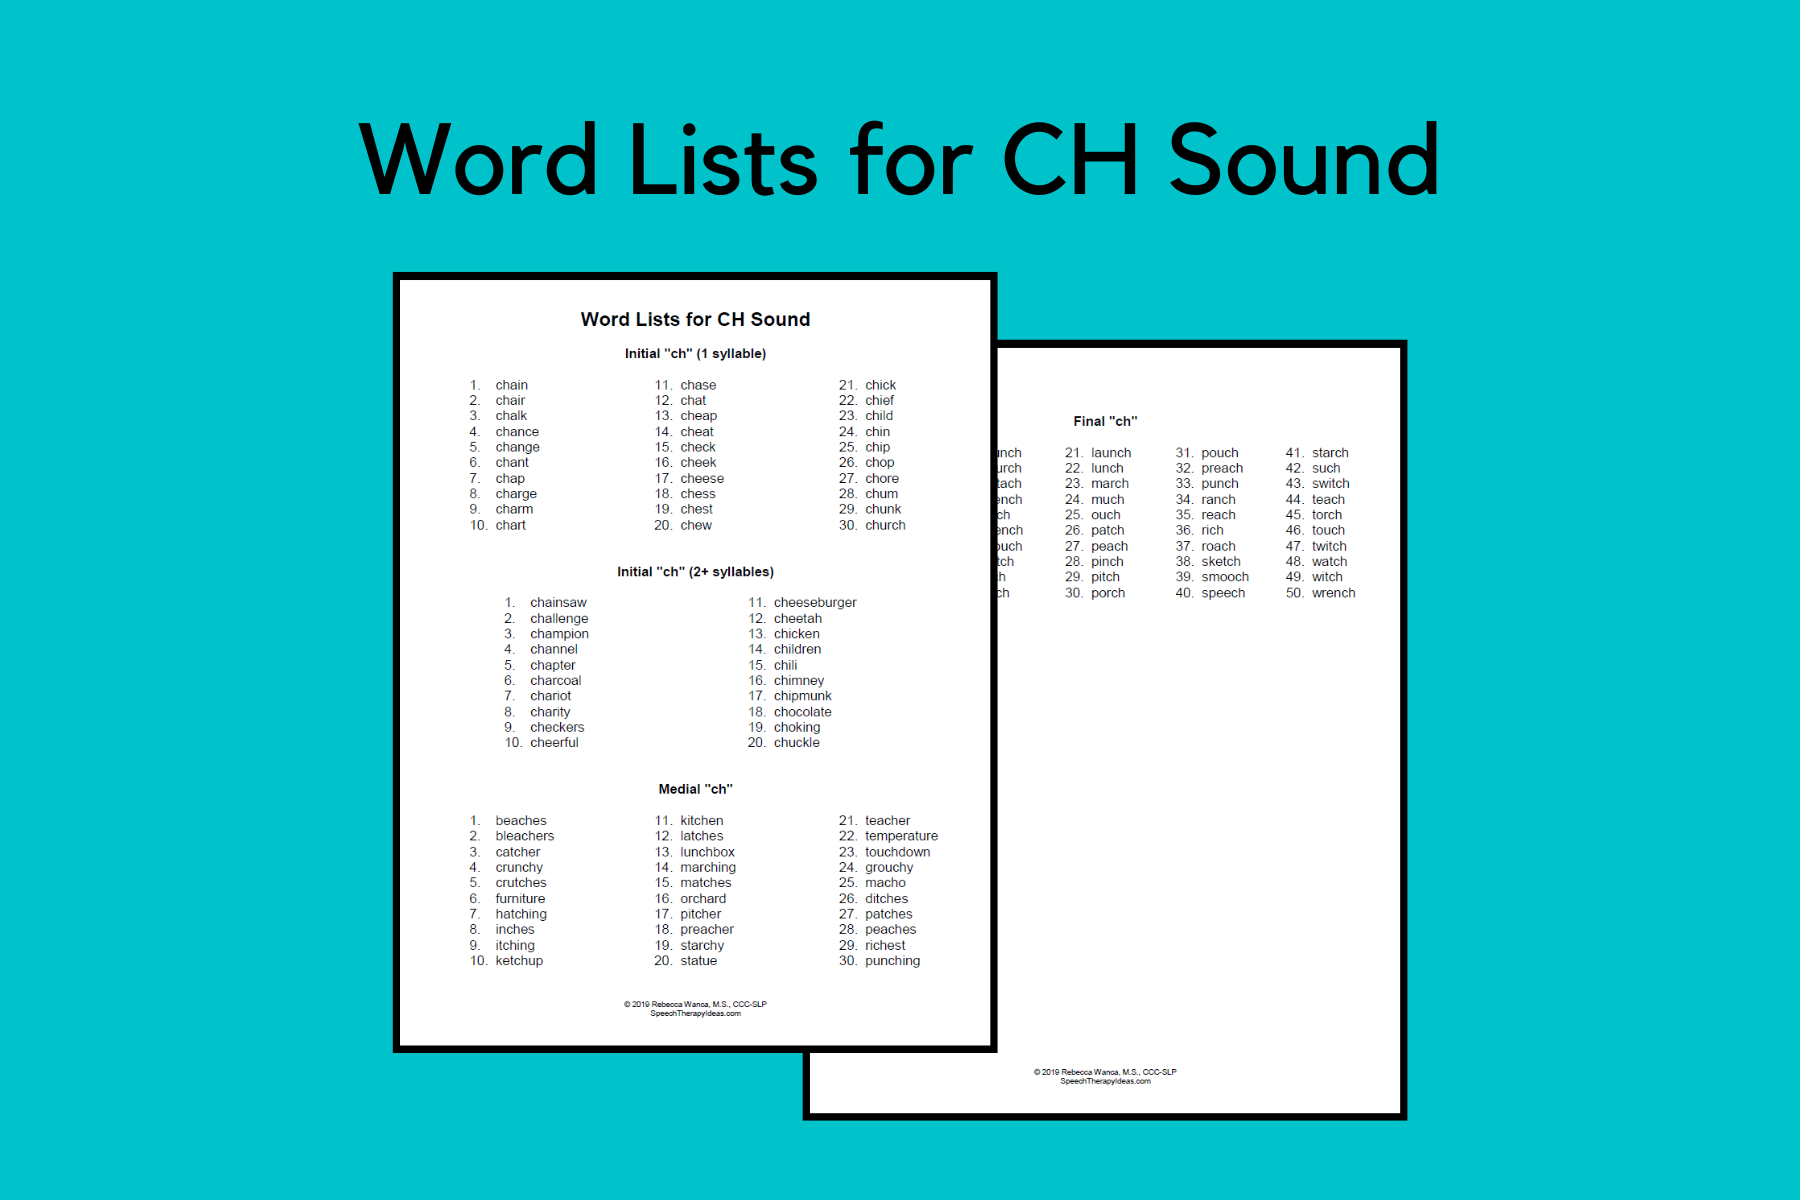 Word Lists for CH Sound